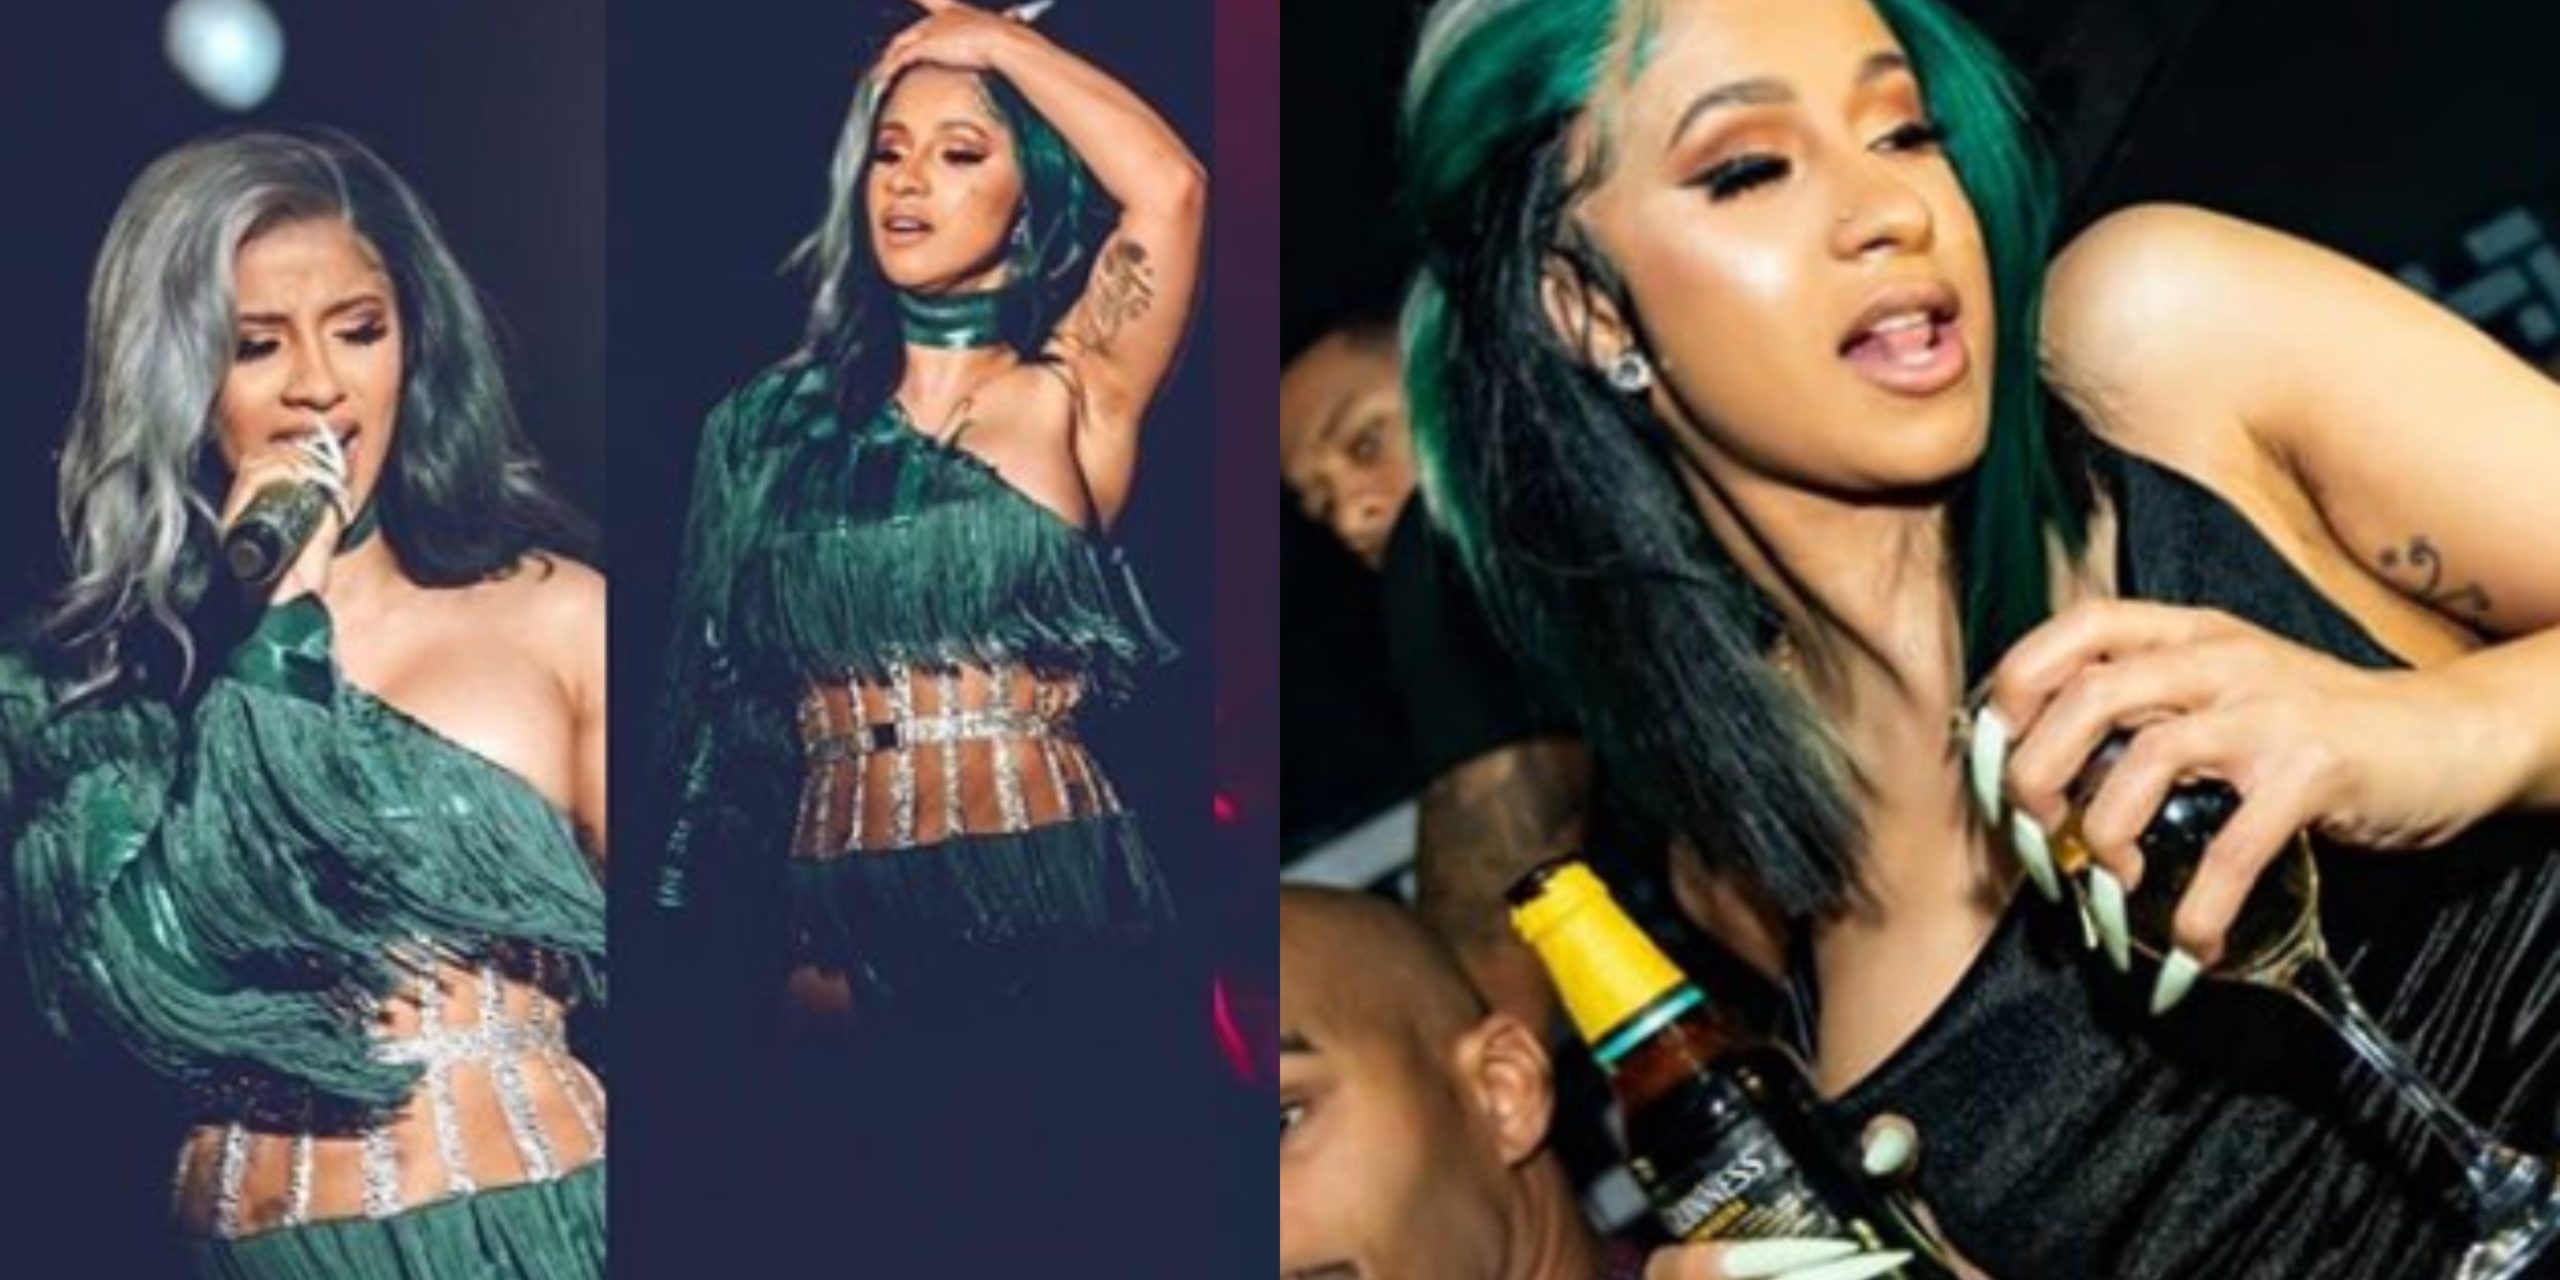 I'm missing Nigeria, please take me back - Cardi cries out (Video)